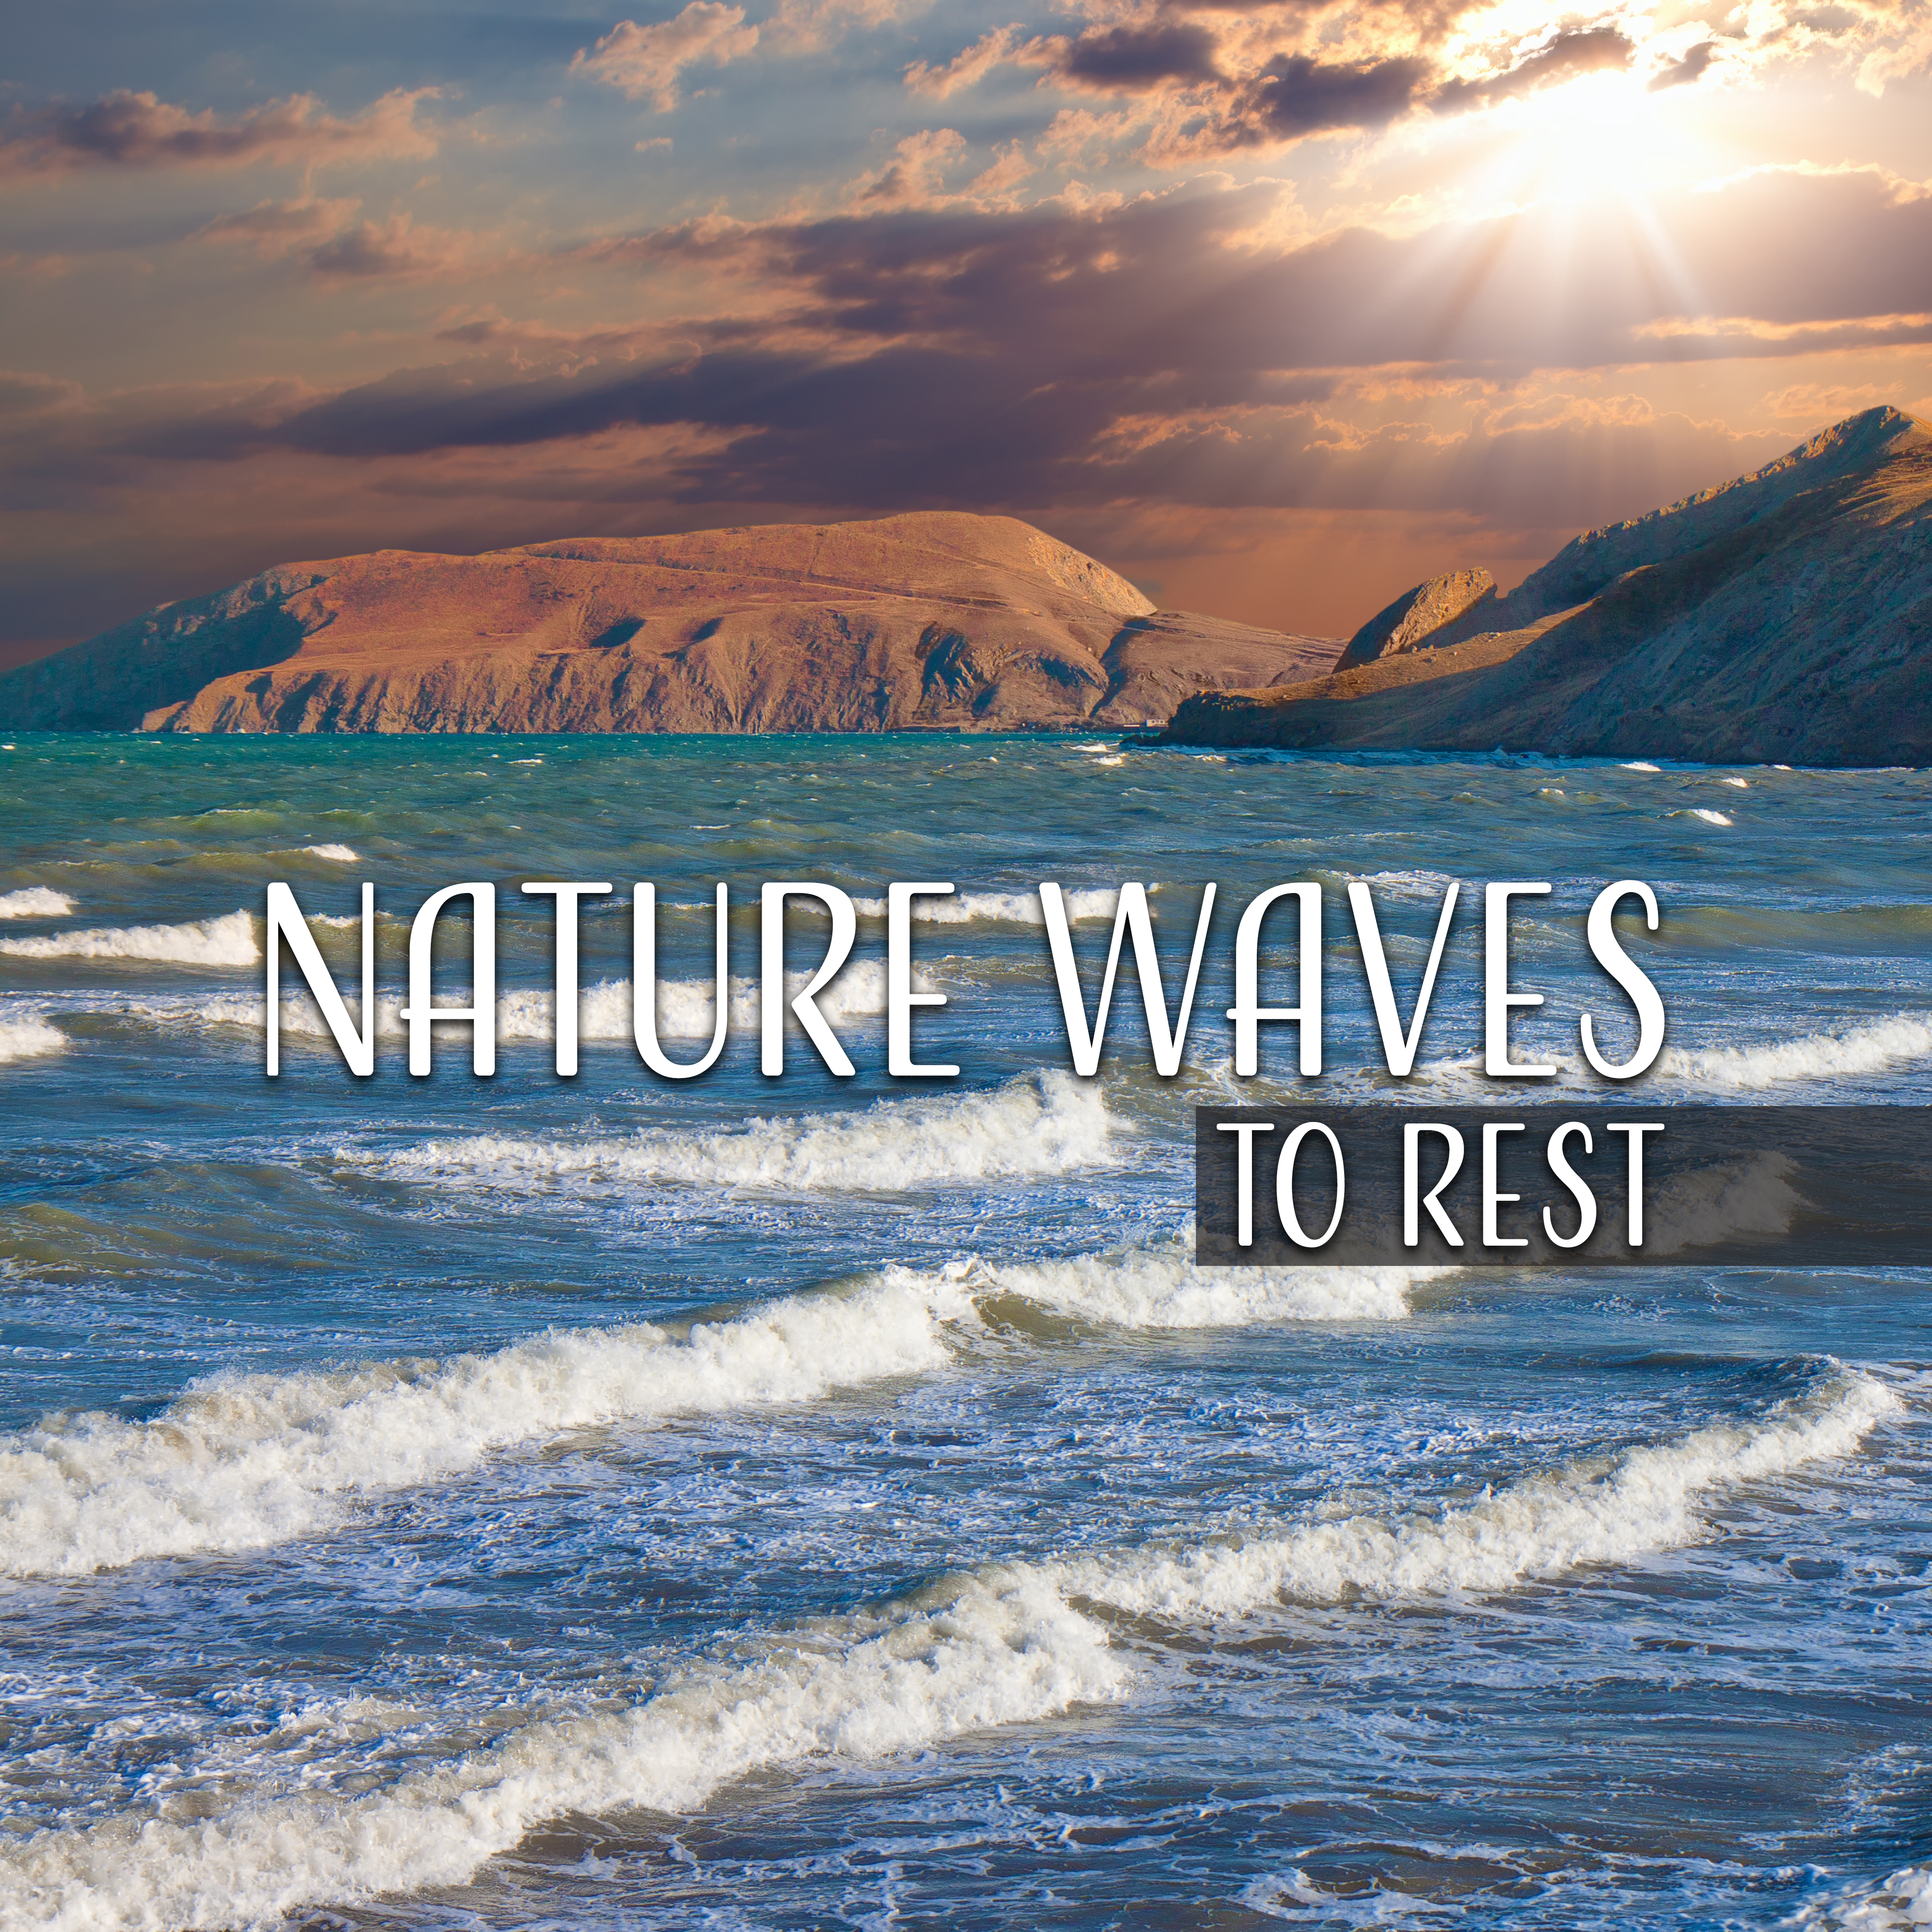 Nature Waves to Rest – Calm New Age Sounds, Peaceful Nature Music, Time to Rest, Meditation Zen Garden